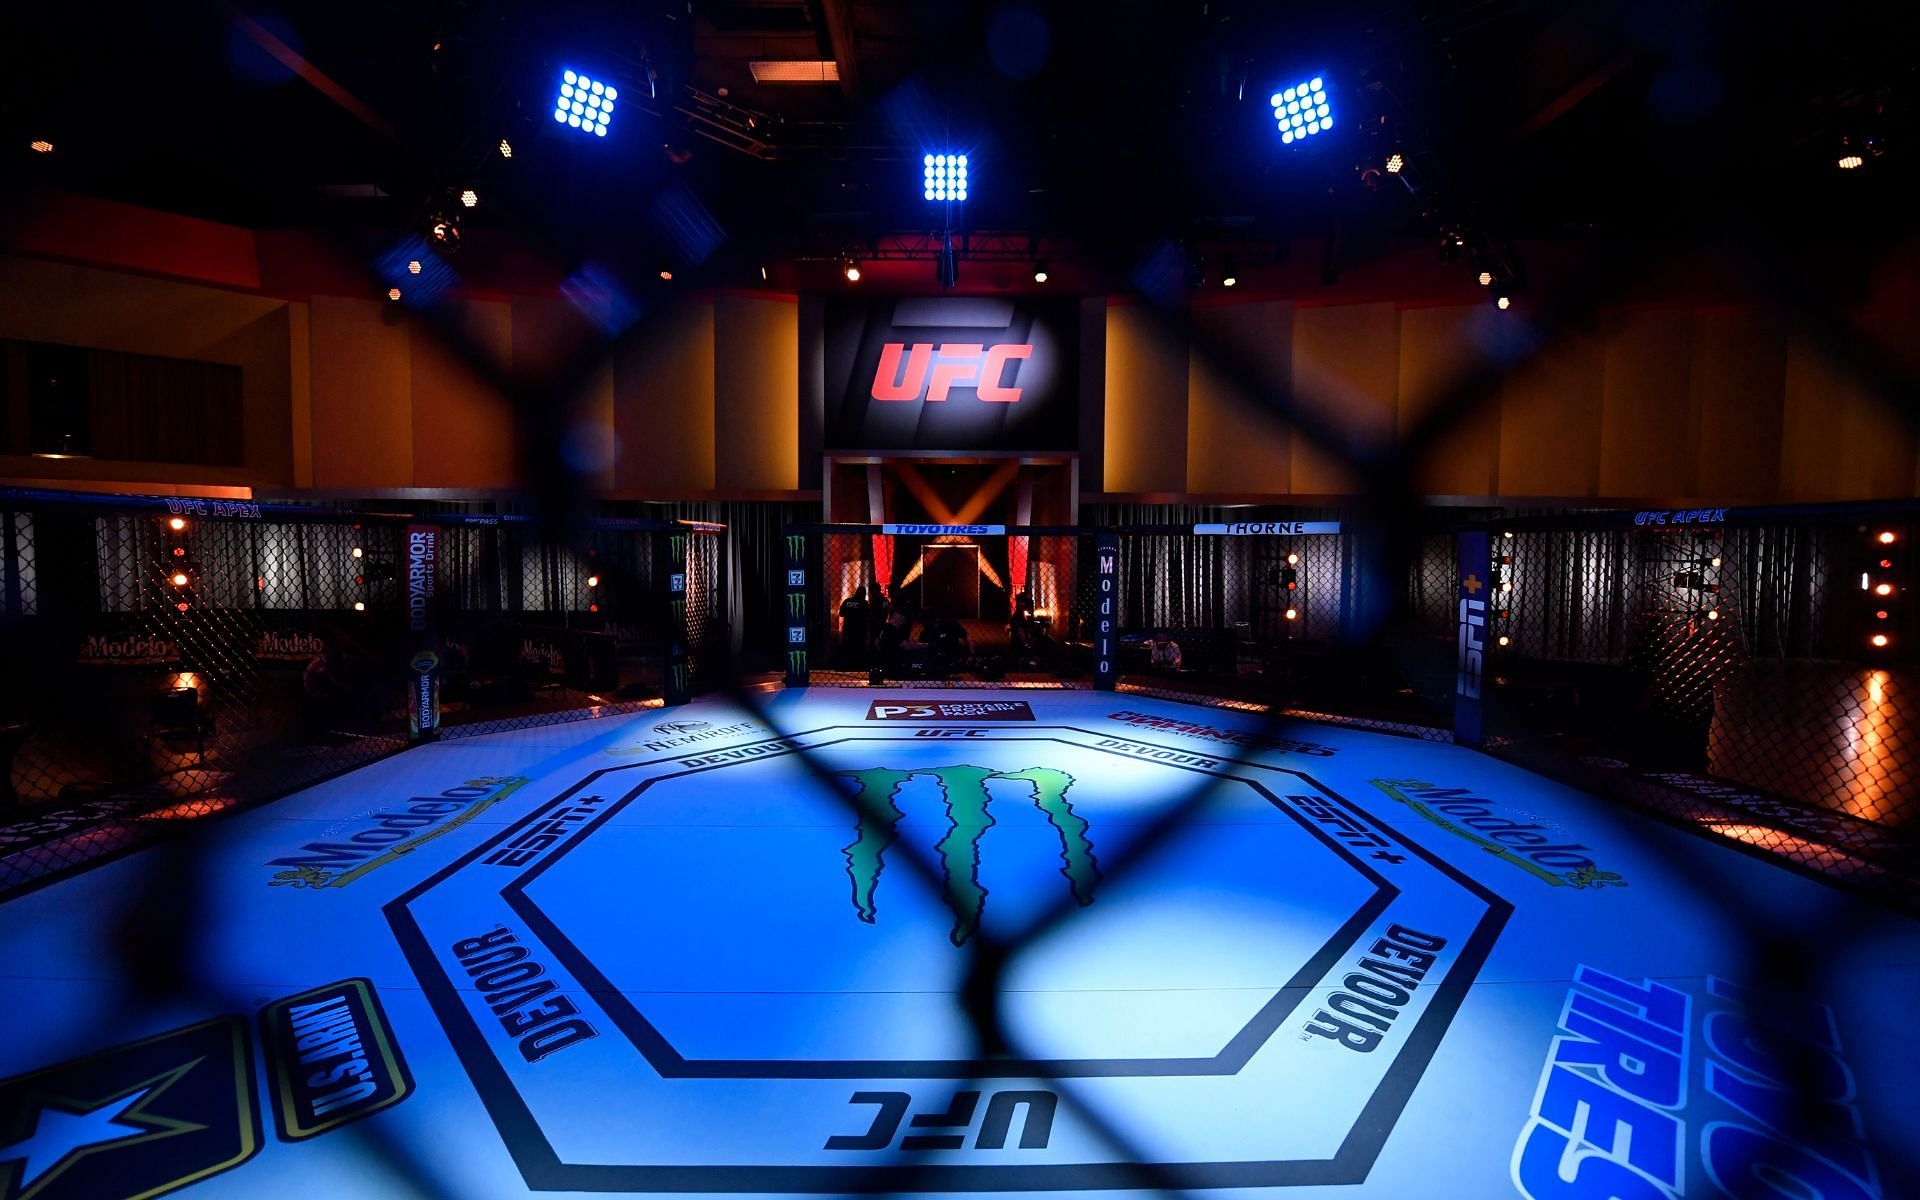 The UFC Apex facility for Fight Night events in Las Vegas, Nevada